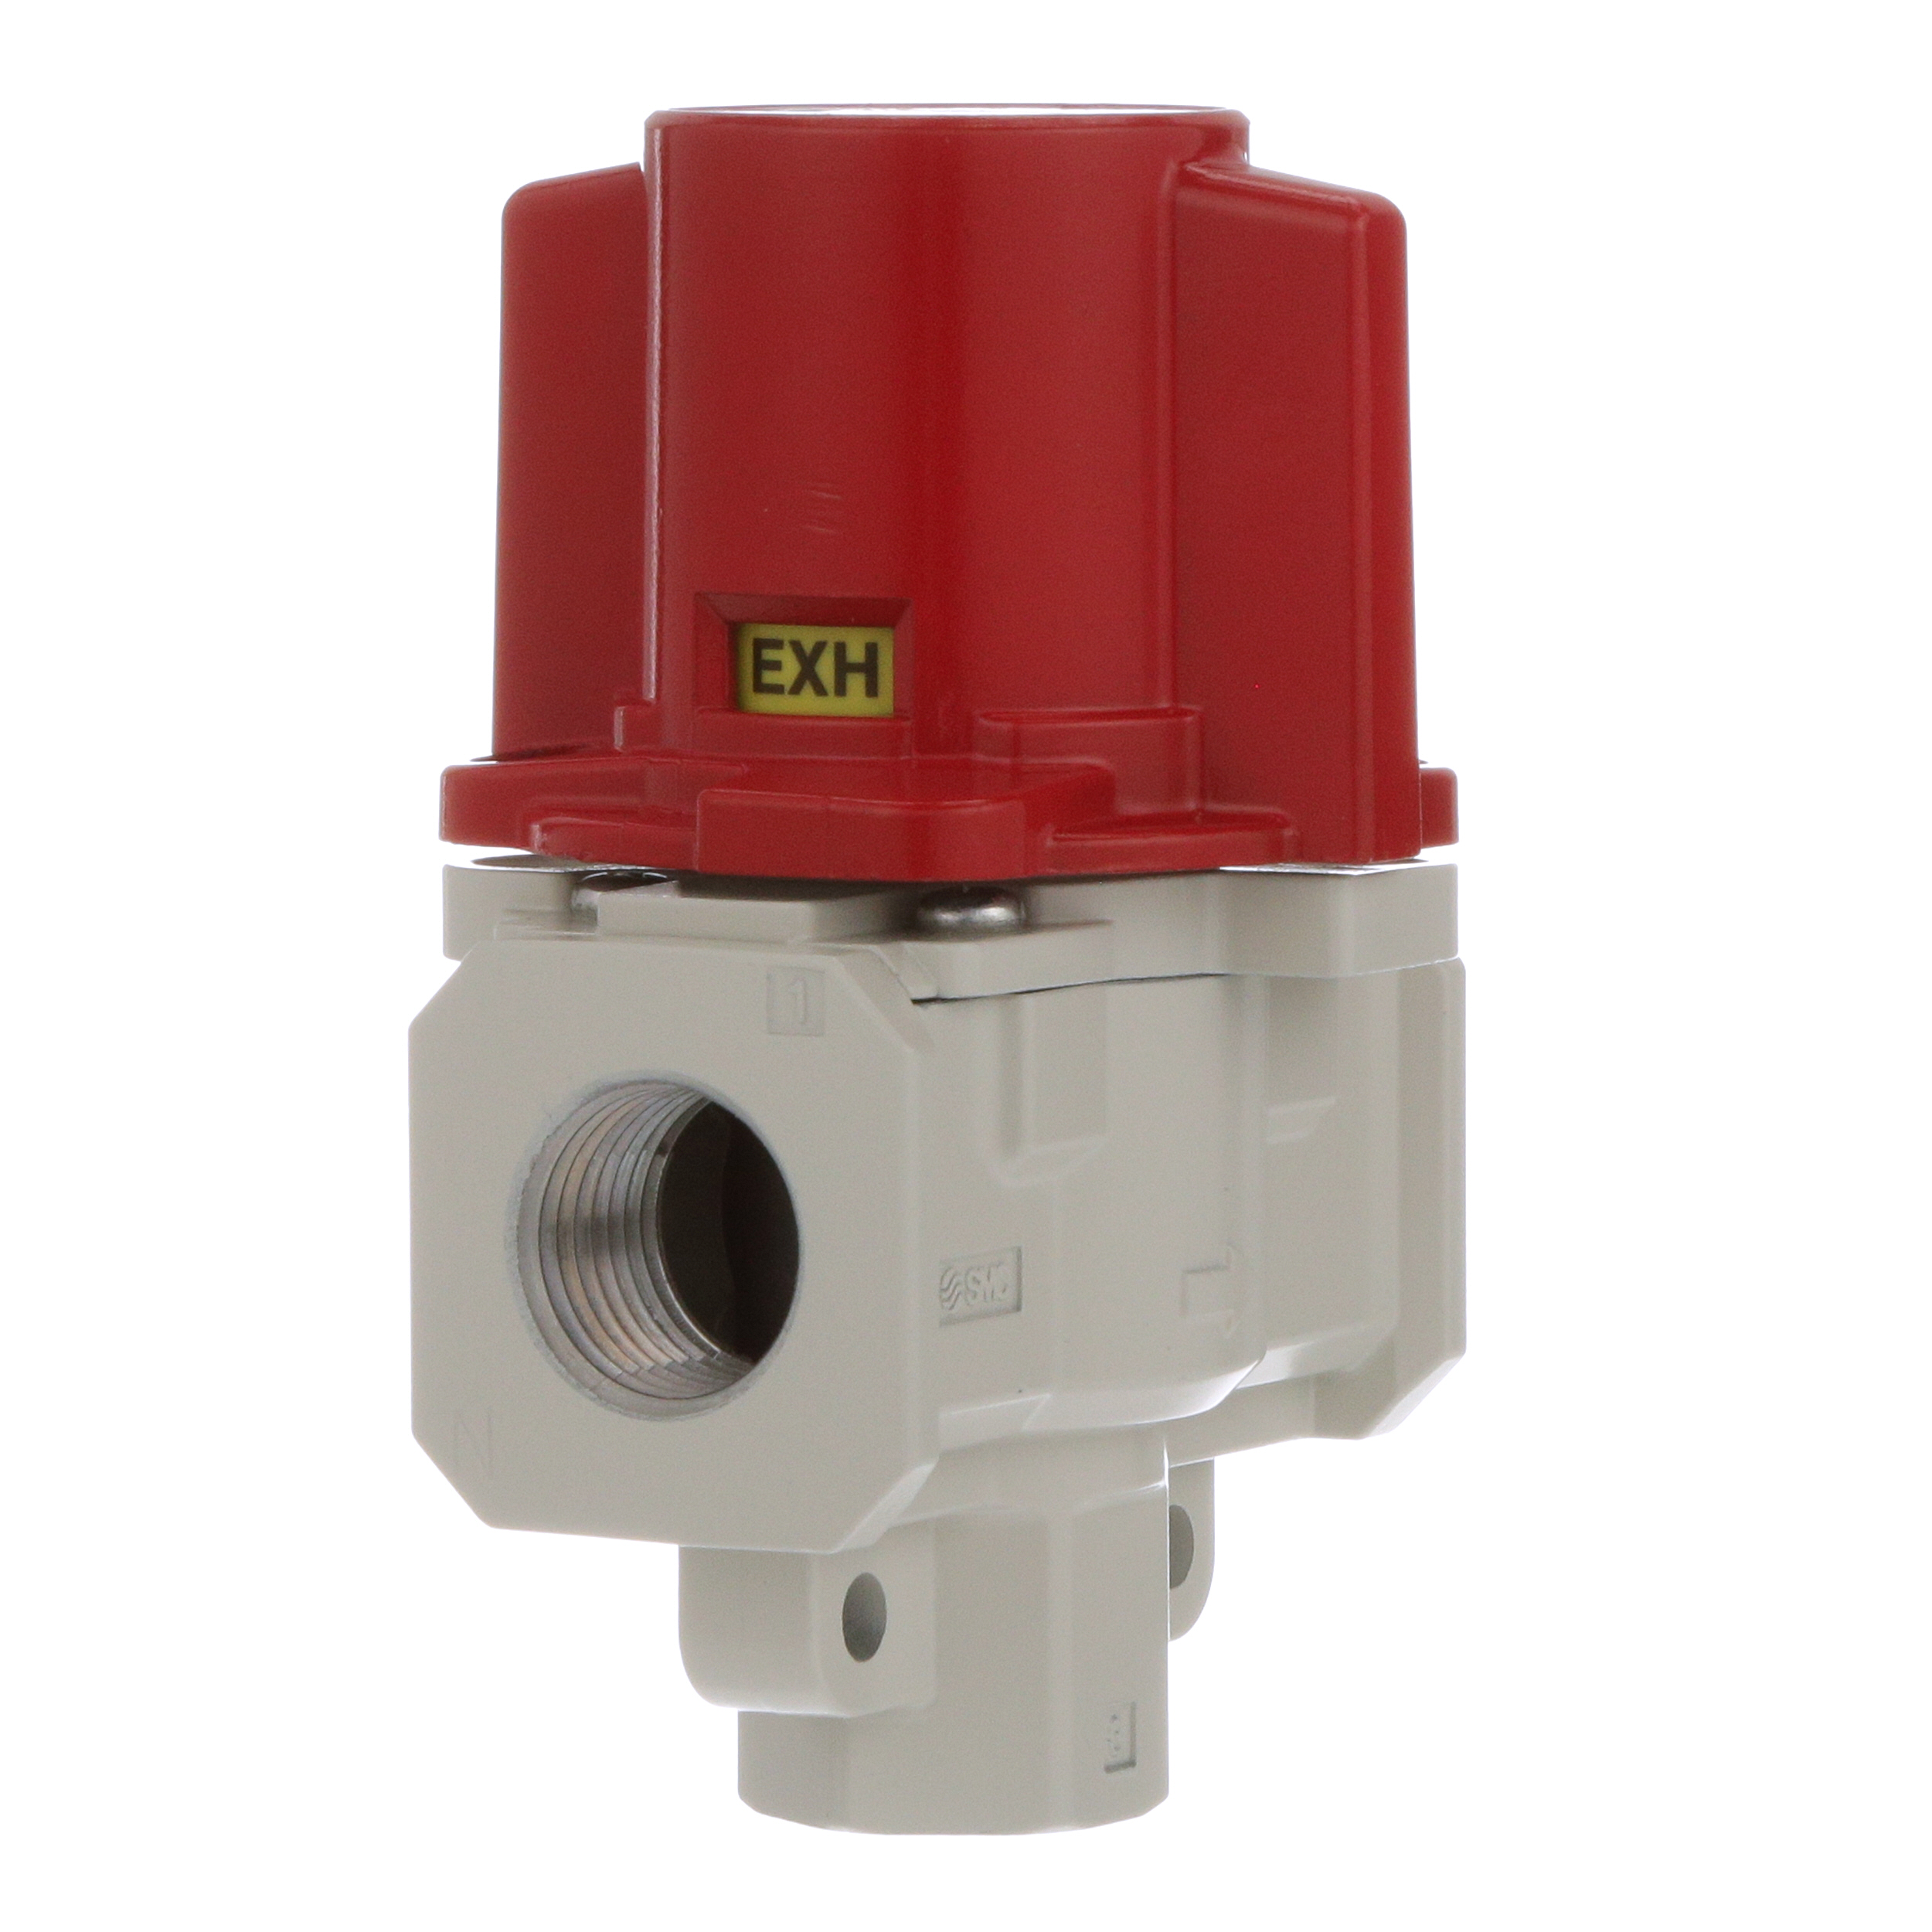 SMC lockable solenoid relief valve for safety and isolation